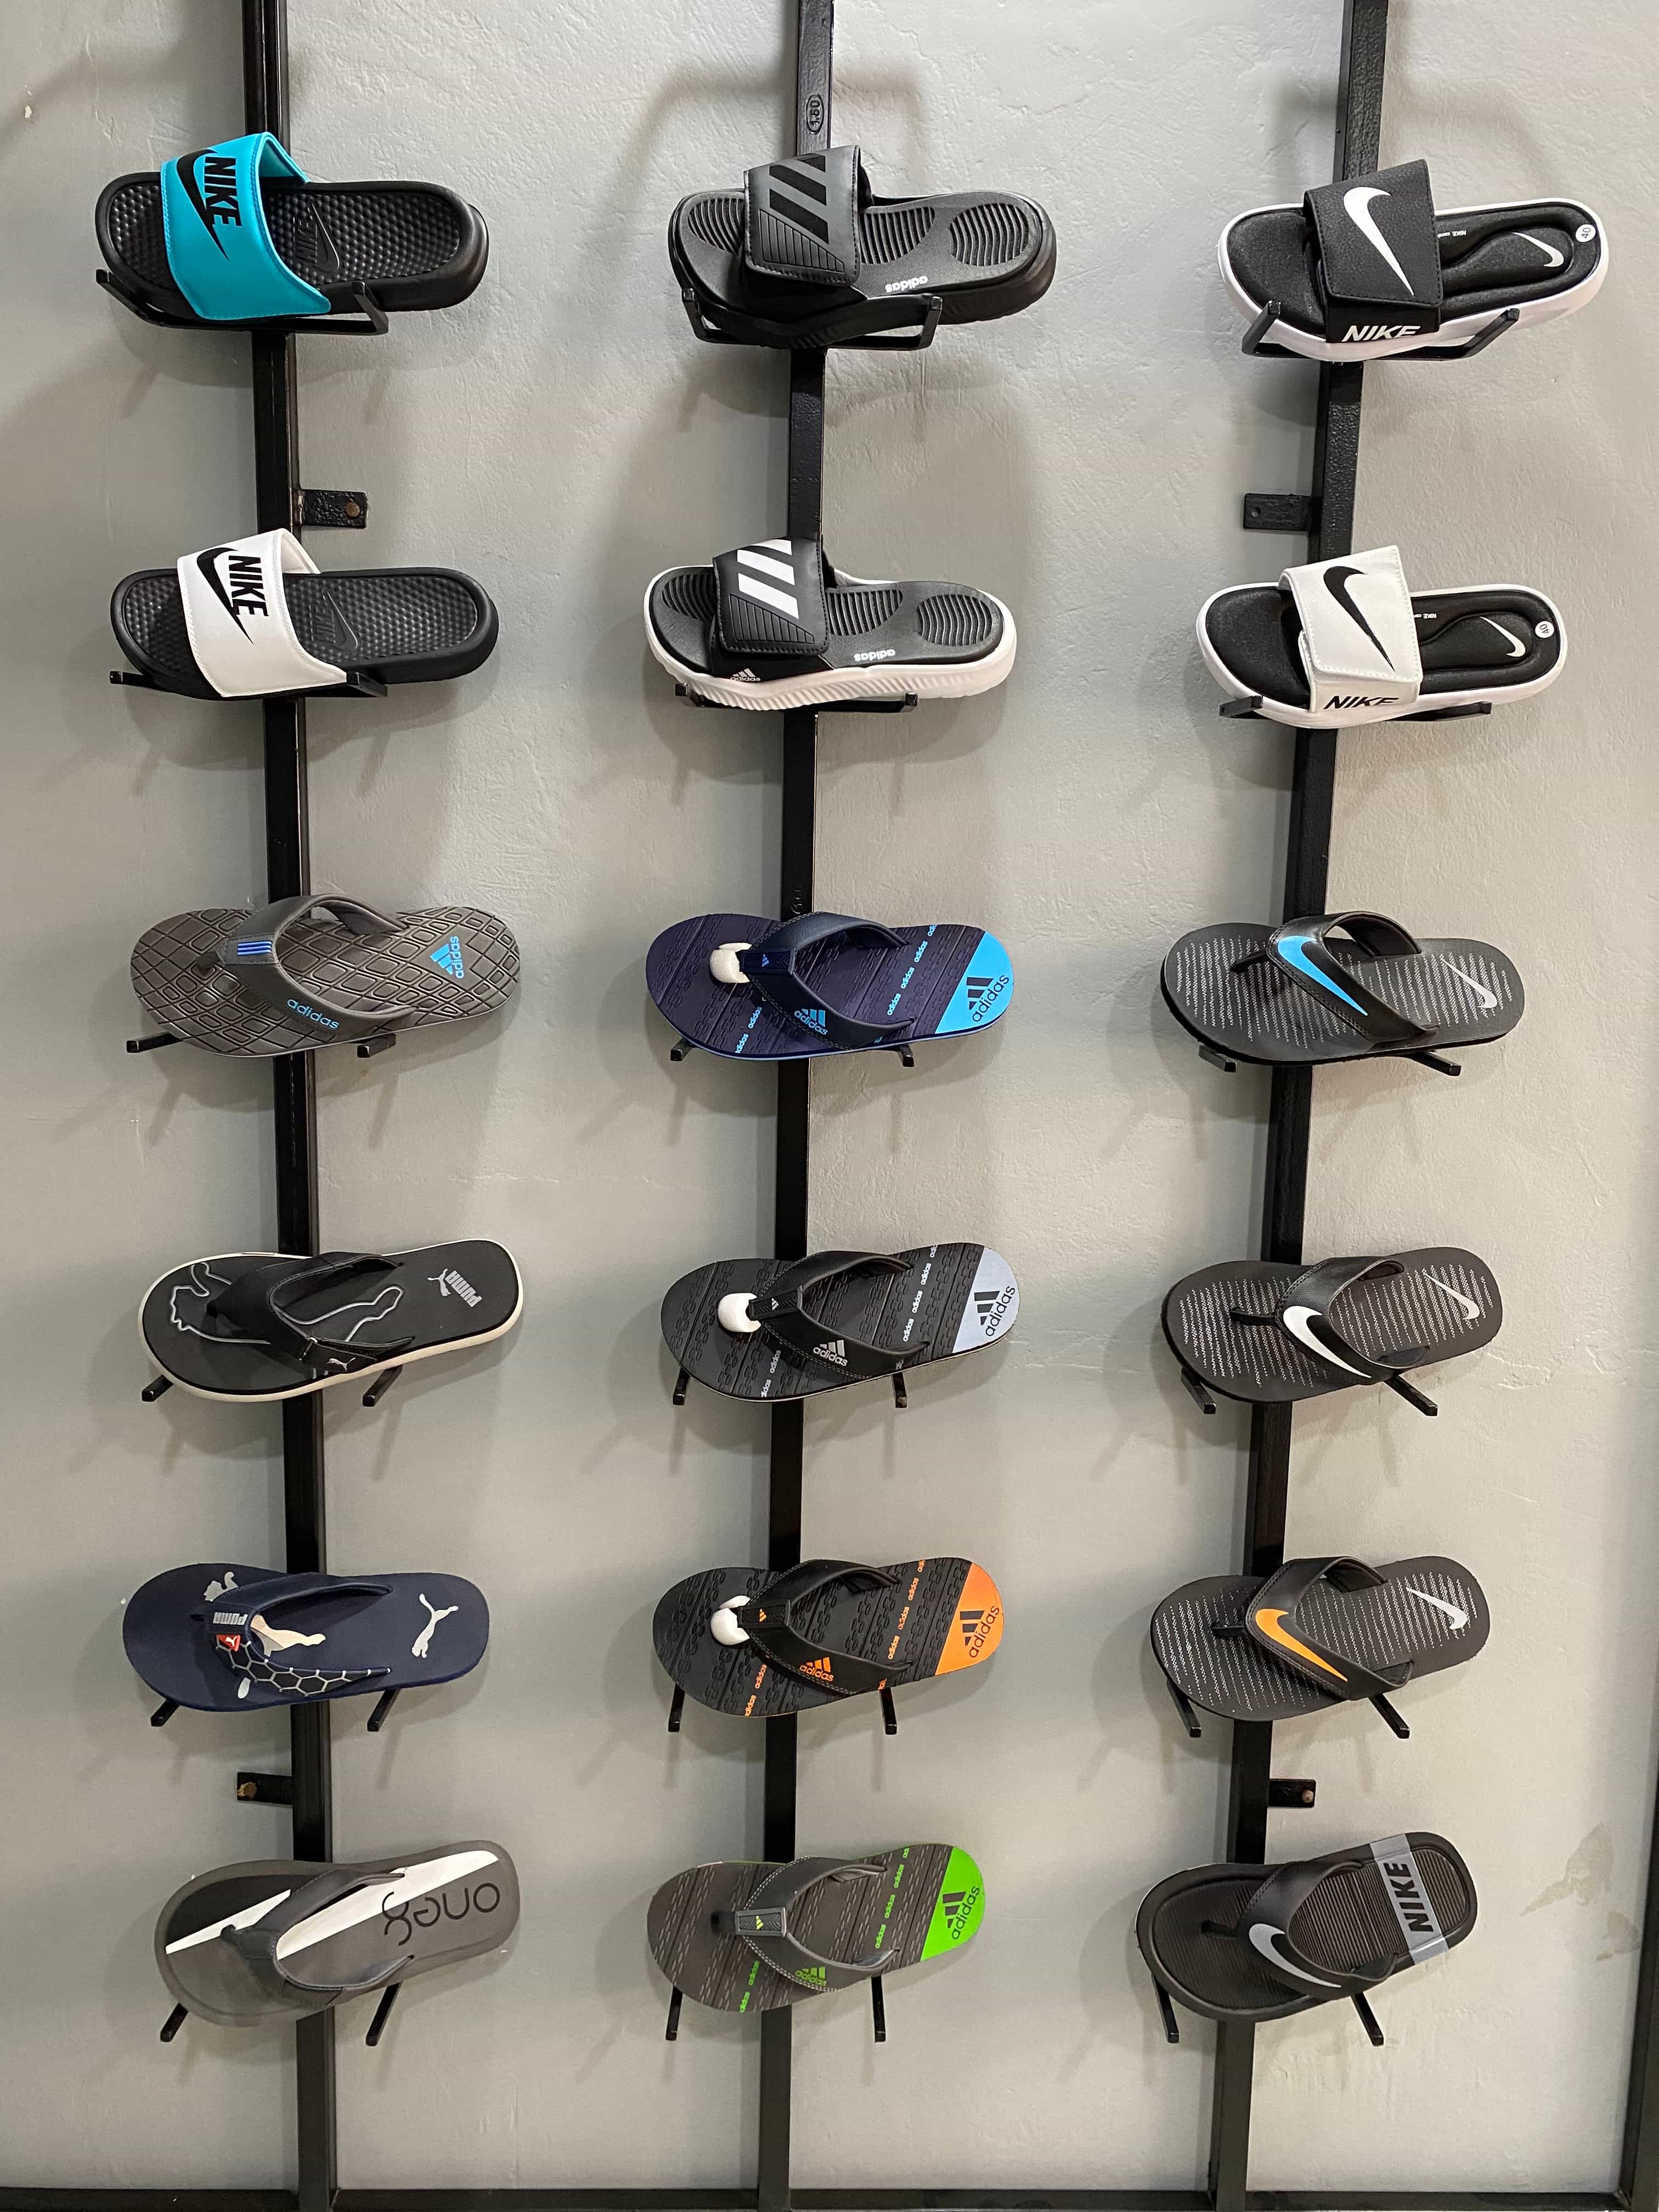 Sandals on display at The Velvet Shoes